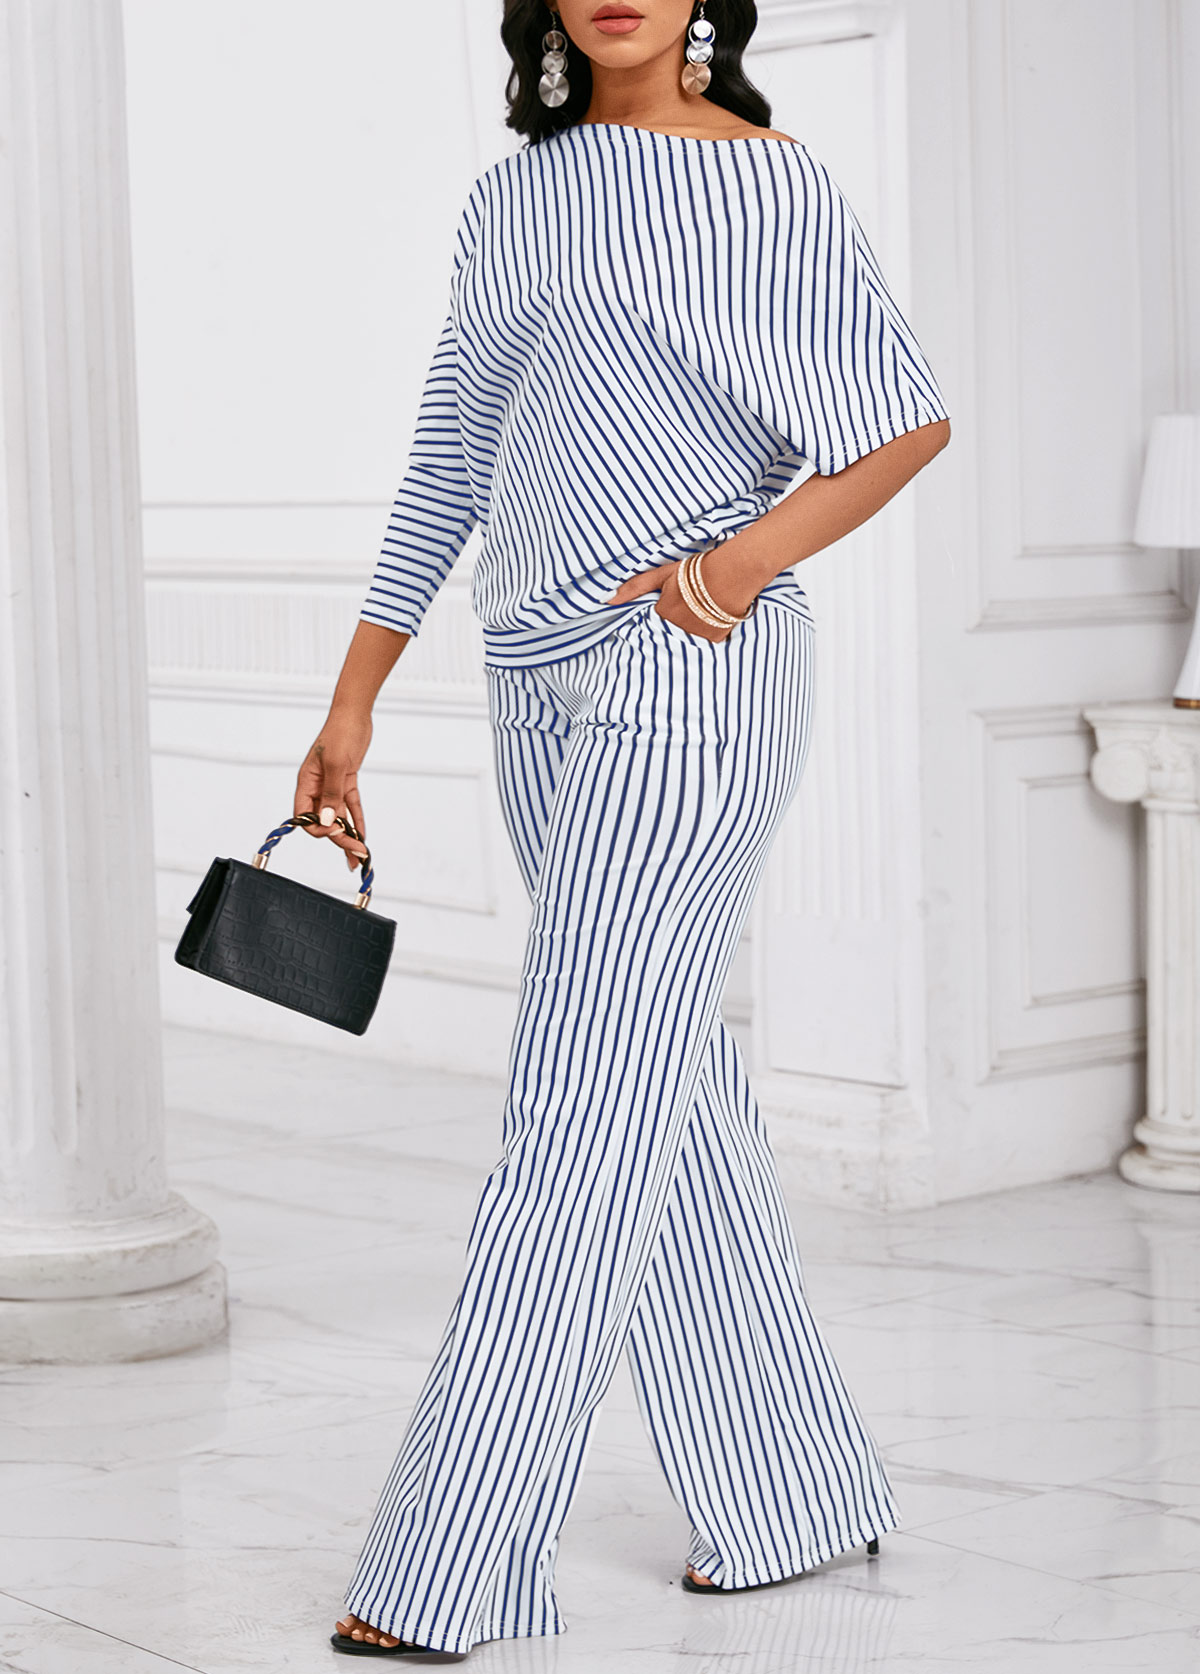 Striped Asymmetry Blue Long Off Shoulder Top and Pants